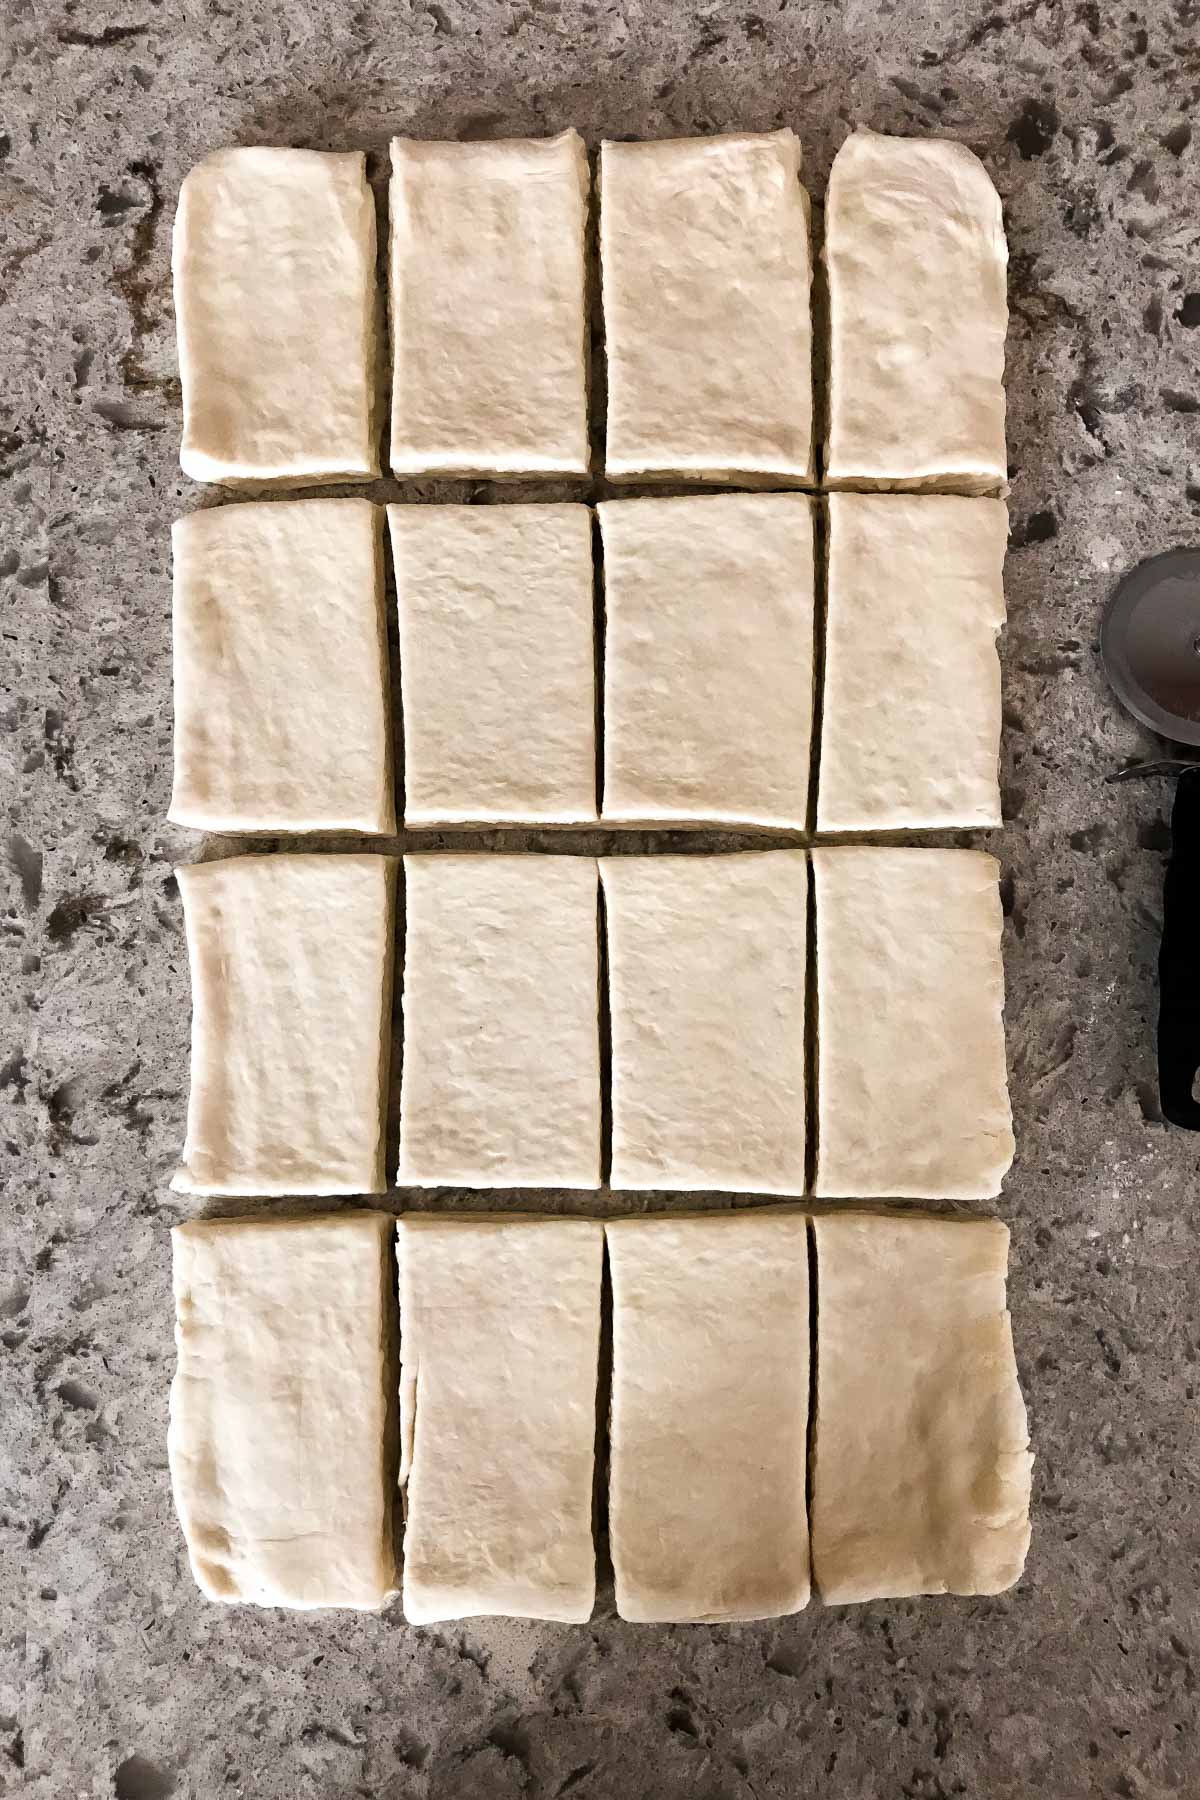 croissant pastry dough rolled out and cut into rectangles